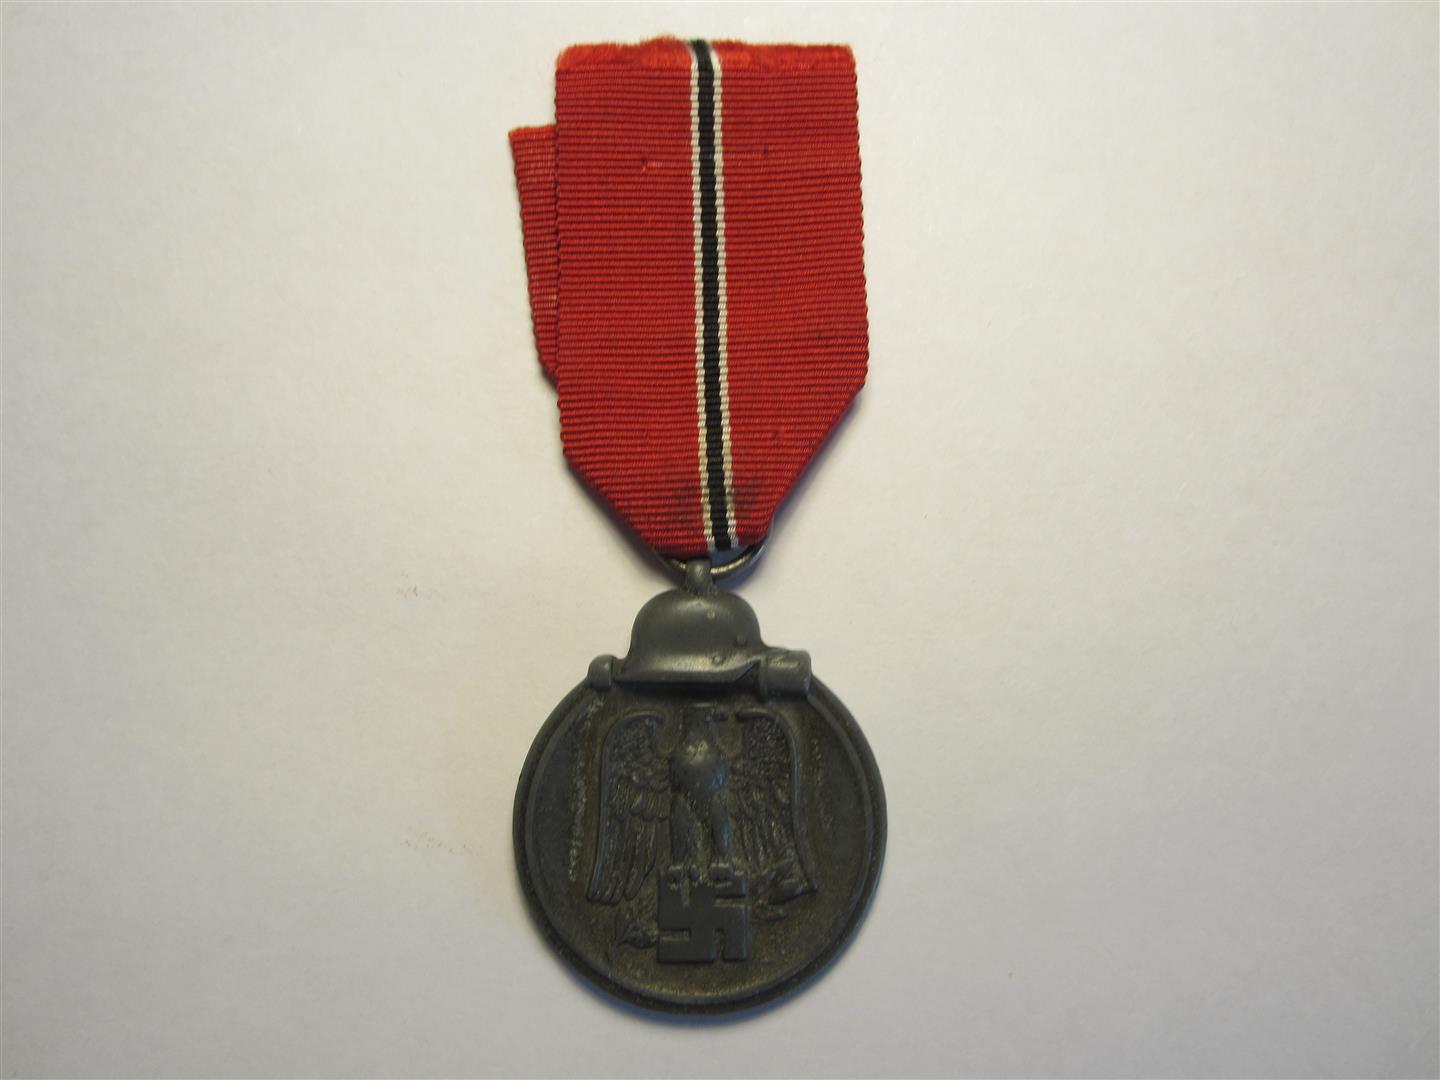 WW2 German Ost Front Medal